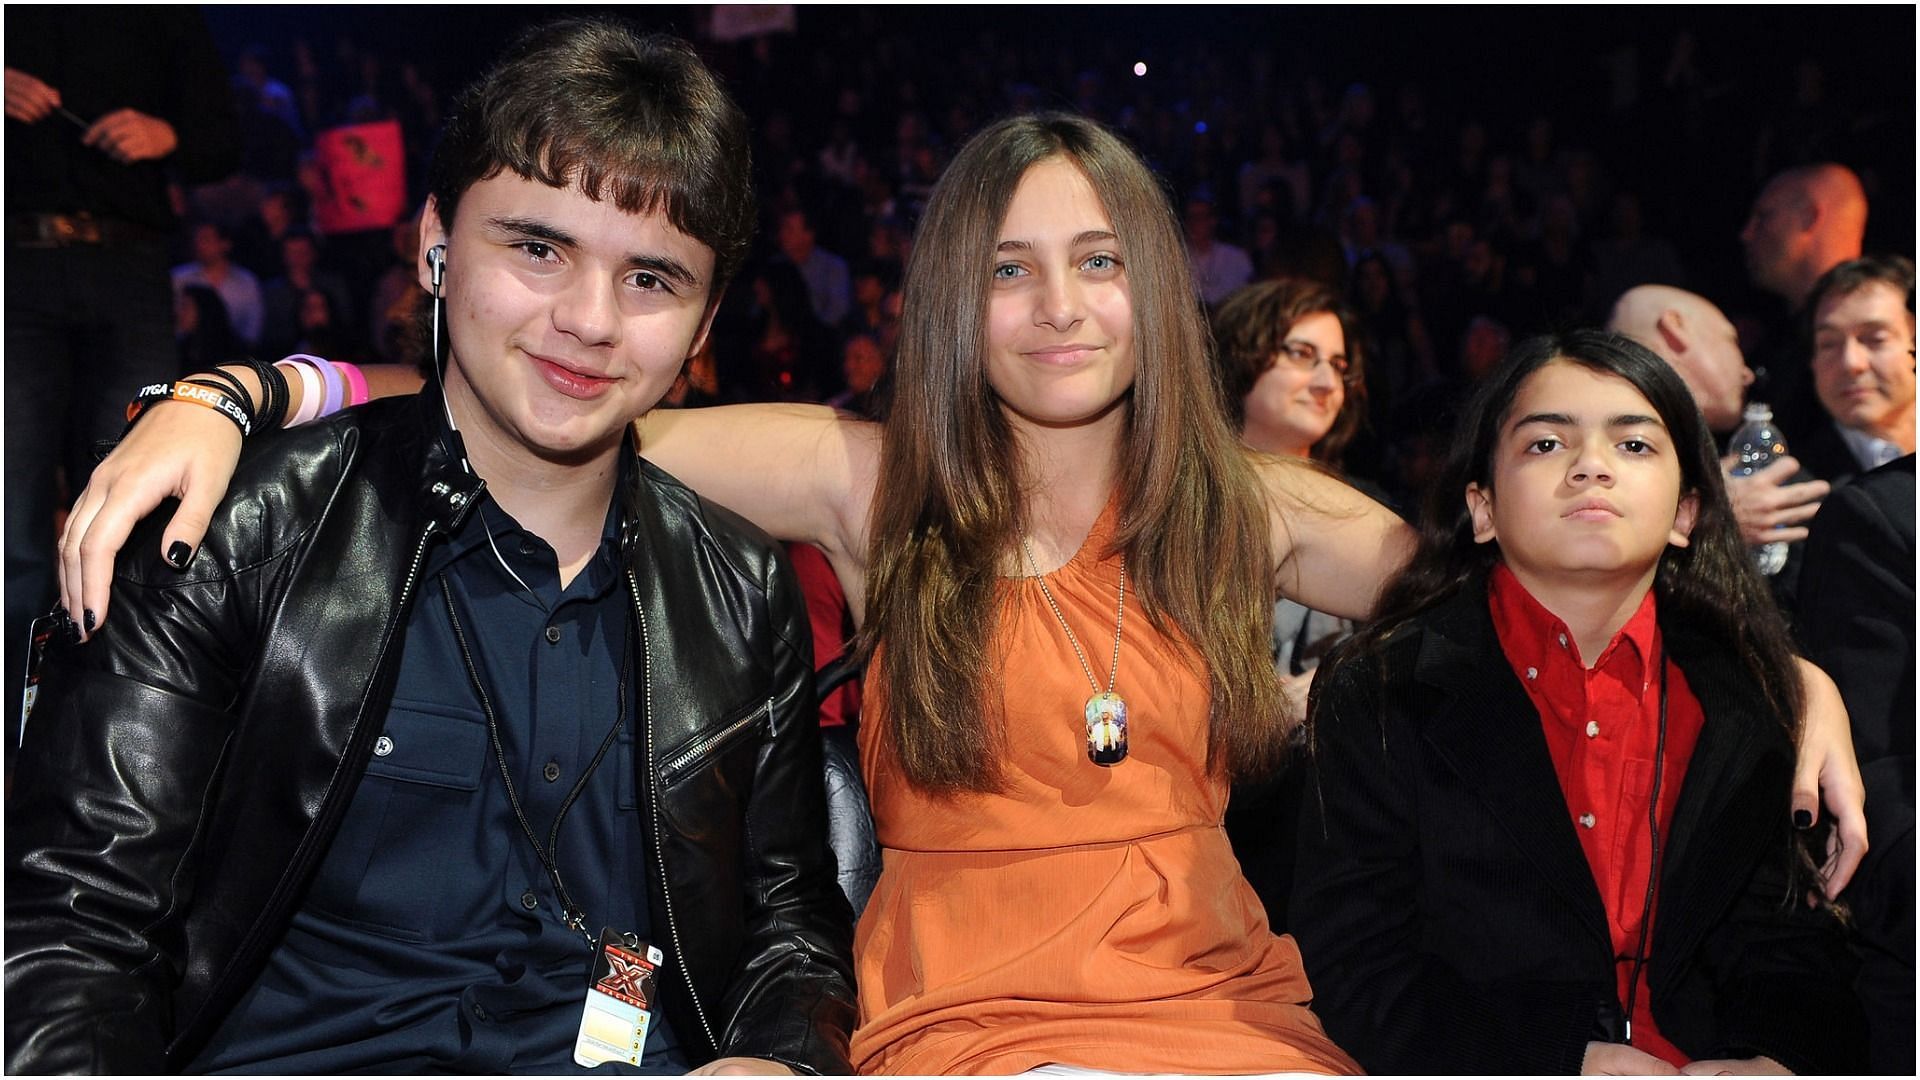 Michael Jackson&#039;s children were spotted at the red carpet of MJ: The Musical (Image via Getty Images/Ray Mickshaw)